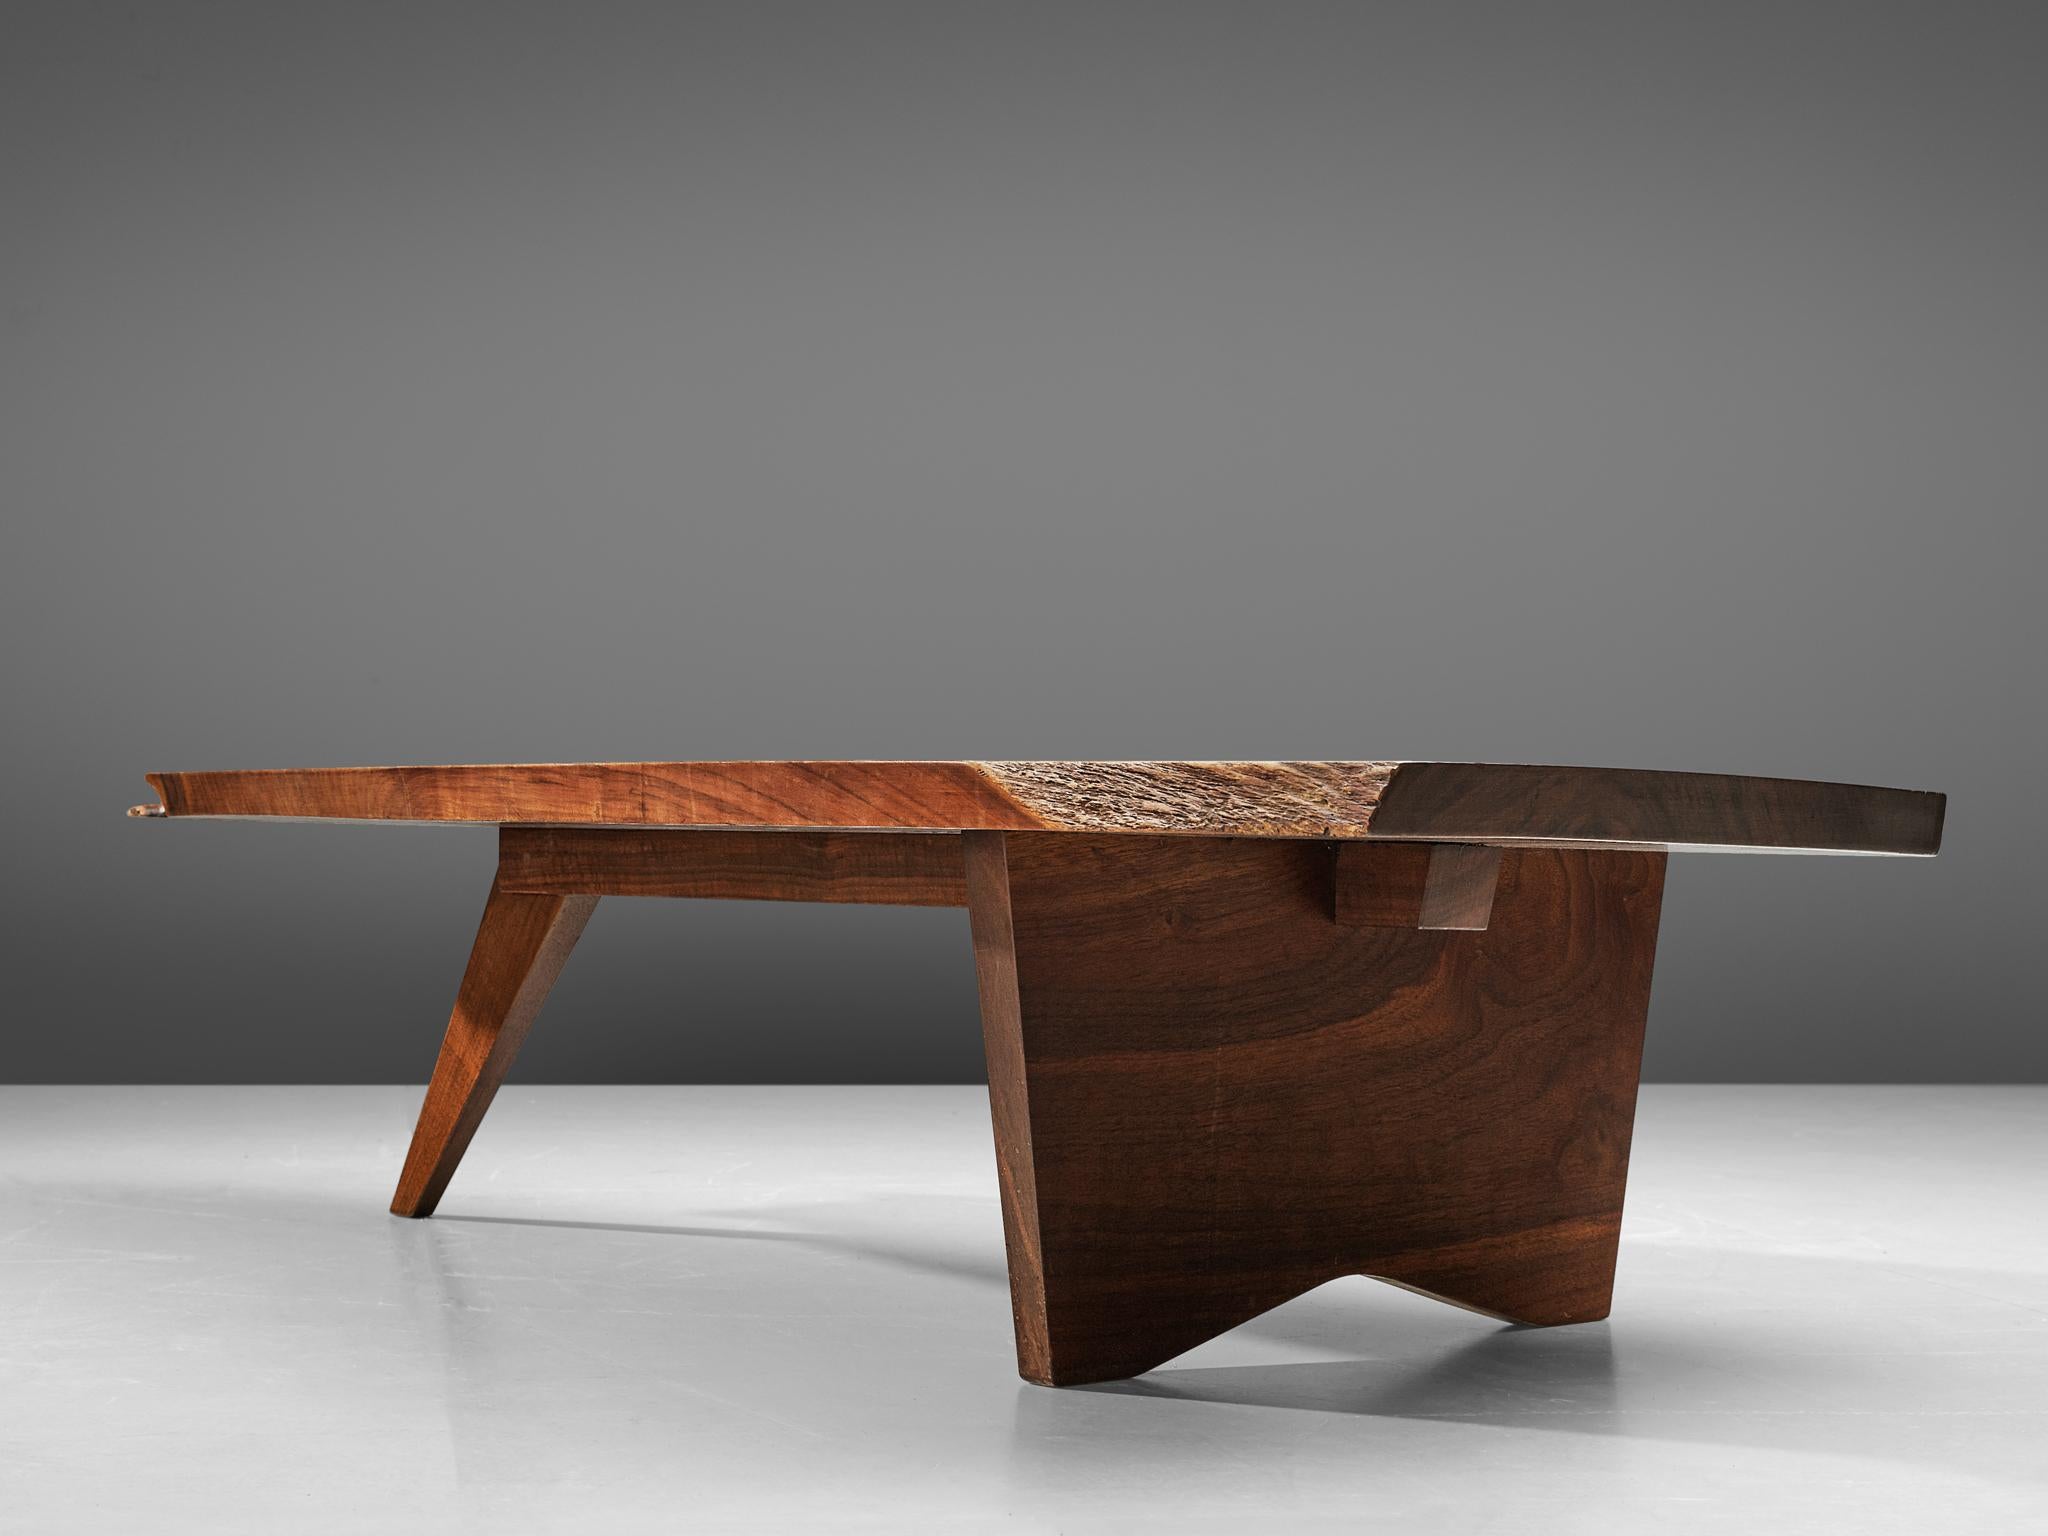 Pair of Slab Coffee Tables by George Nakashima 1